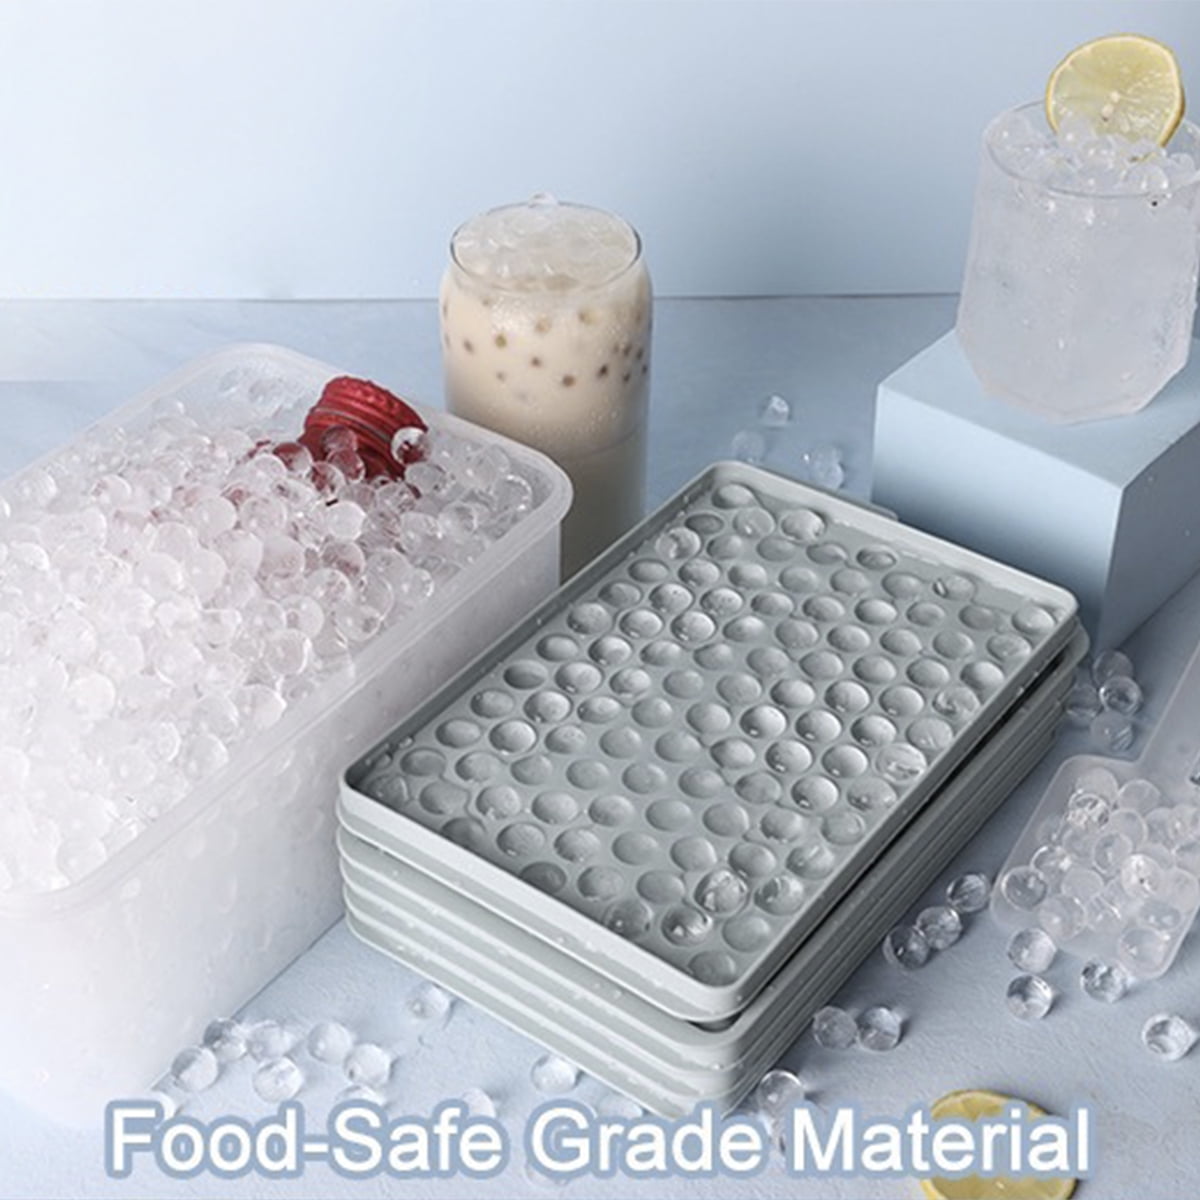 XMMSWDLA Ice Cube Mold 21 Cell Silicone Folding Ice Cell Ice Maker